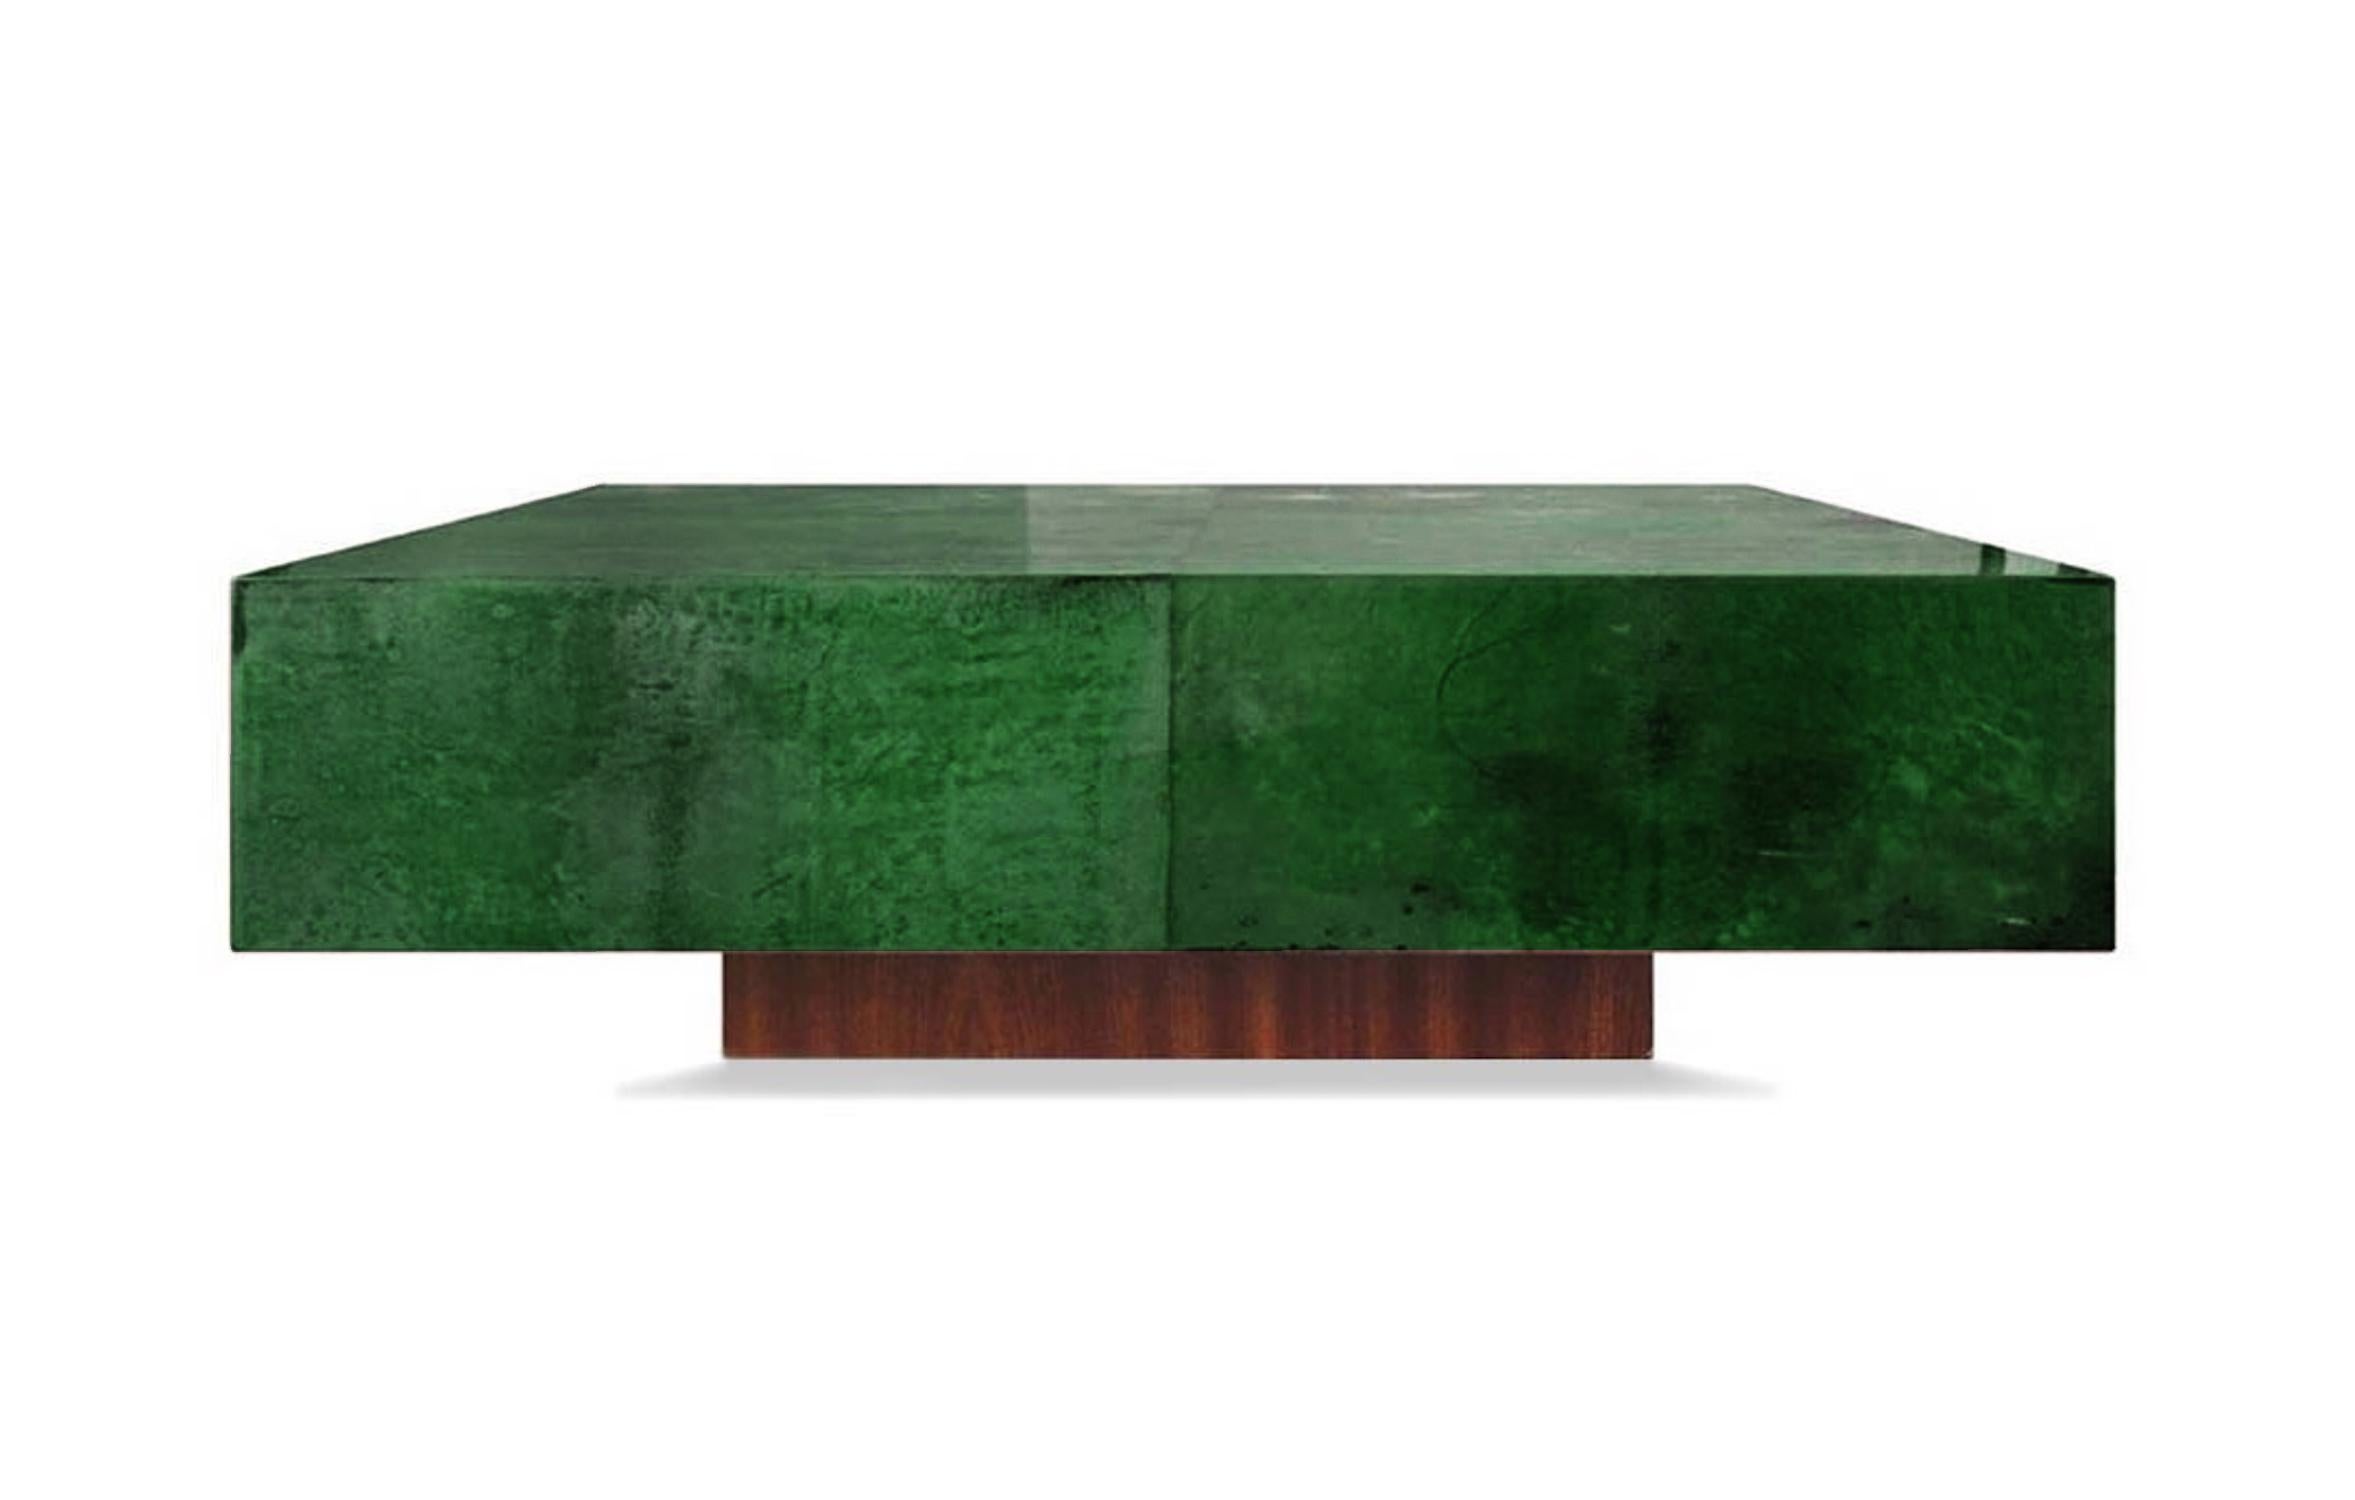 Gorgeous Parchment goatskin leather coffee table in Emerald Green, full of beautiful shades: indeed a very artistic craftsmanship of leather dyeing.
The top in parchment goatskin high gloss polish finished, sits on a mahogany wood base.
Minimalist